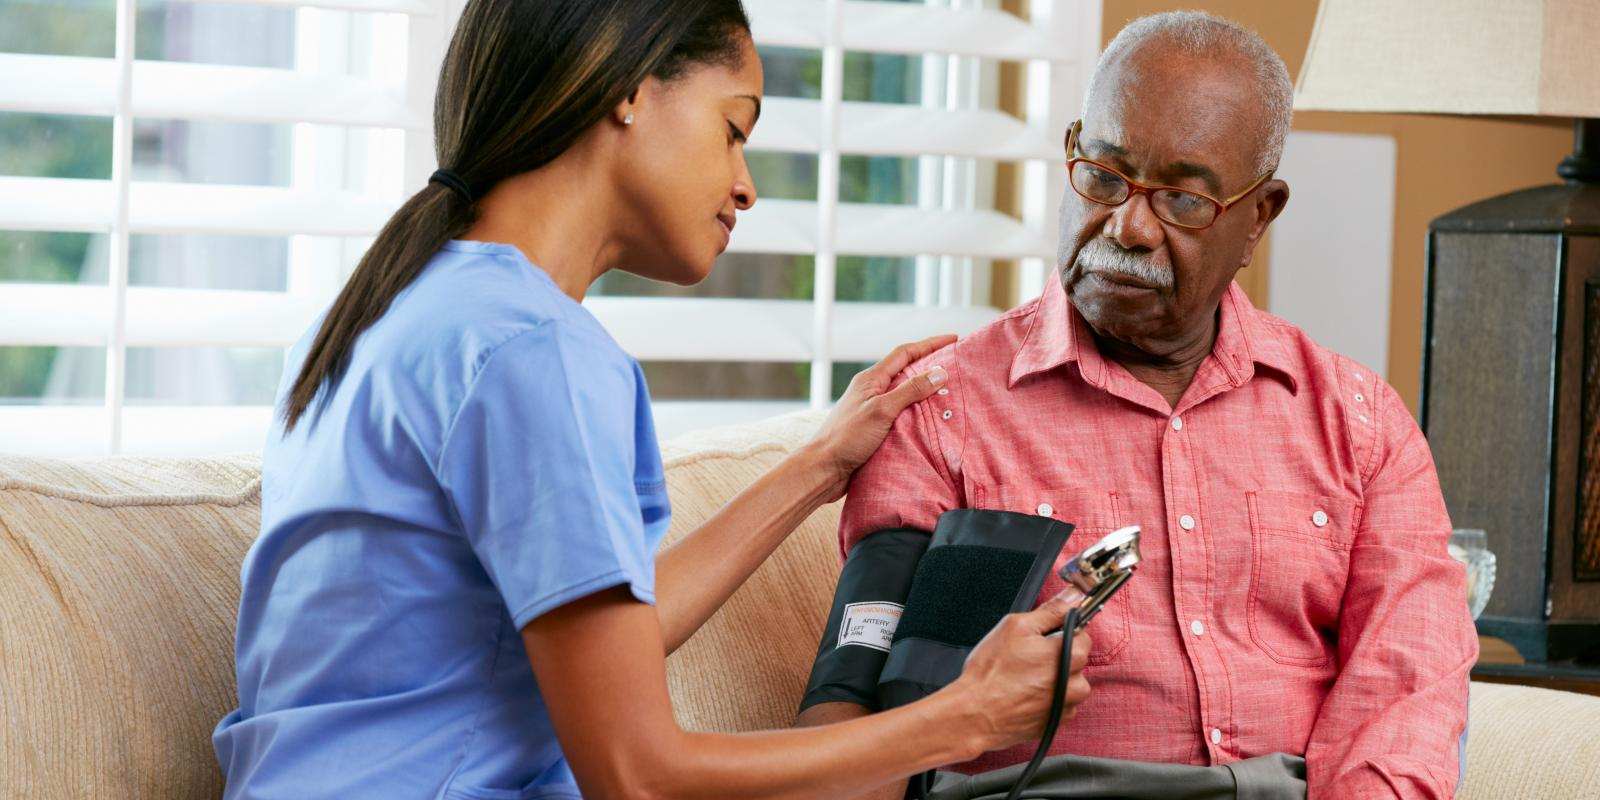 Check If You Have Signs Of High Blood Pressure Without Meeting A Doctor